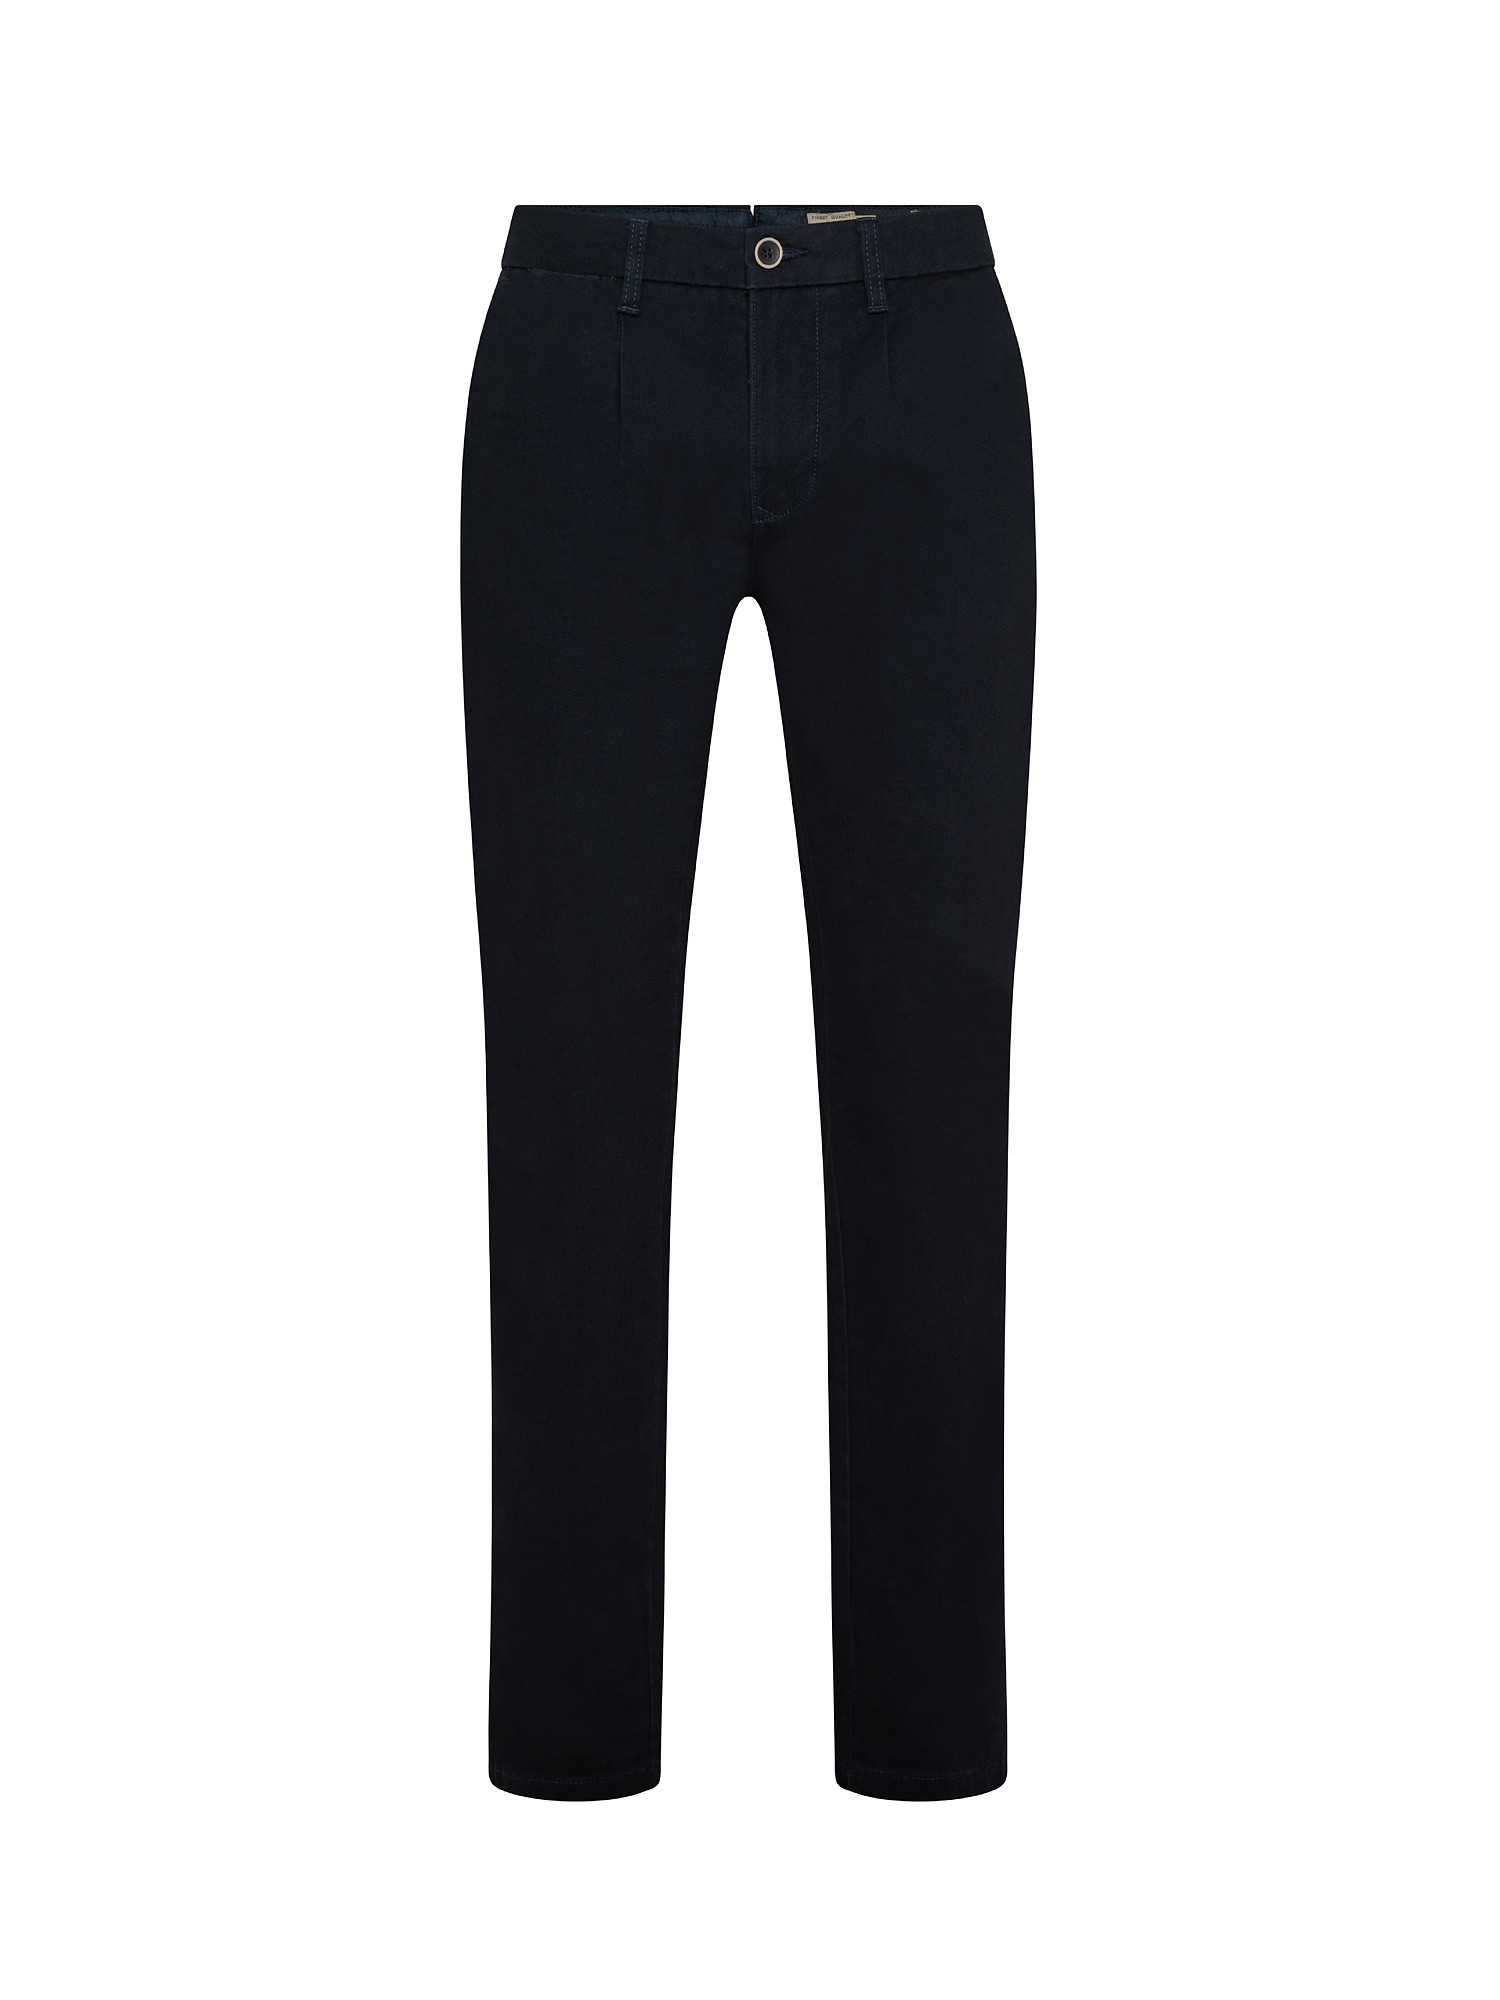 Chino trousers, Black, large image number 0